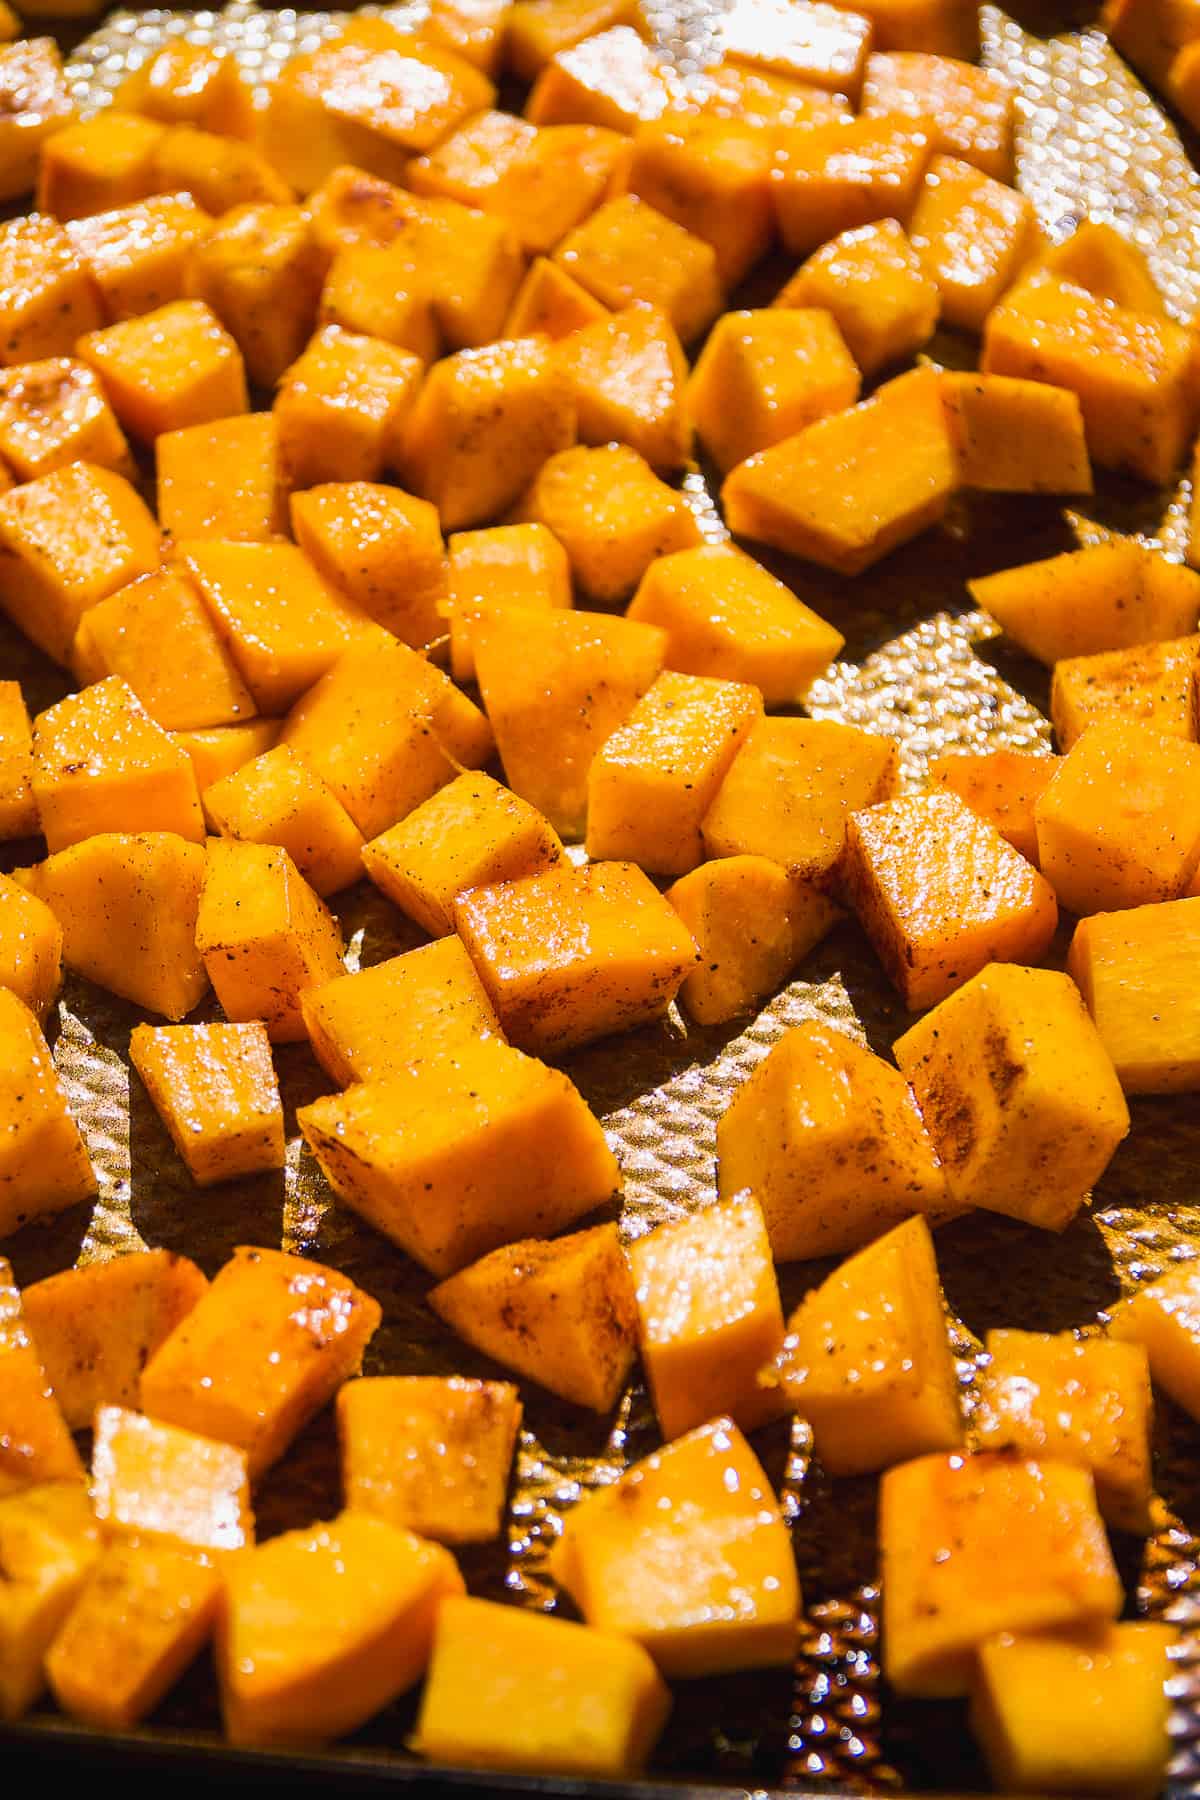 Pumpkin cubes tossed in spices and oil on a baking sheet.